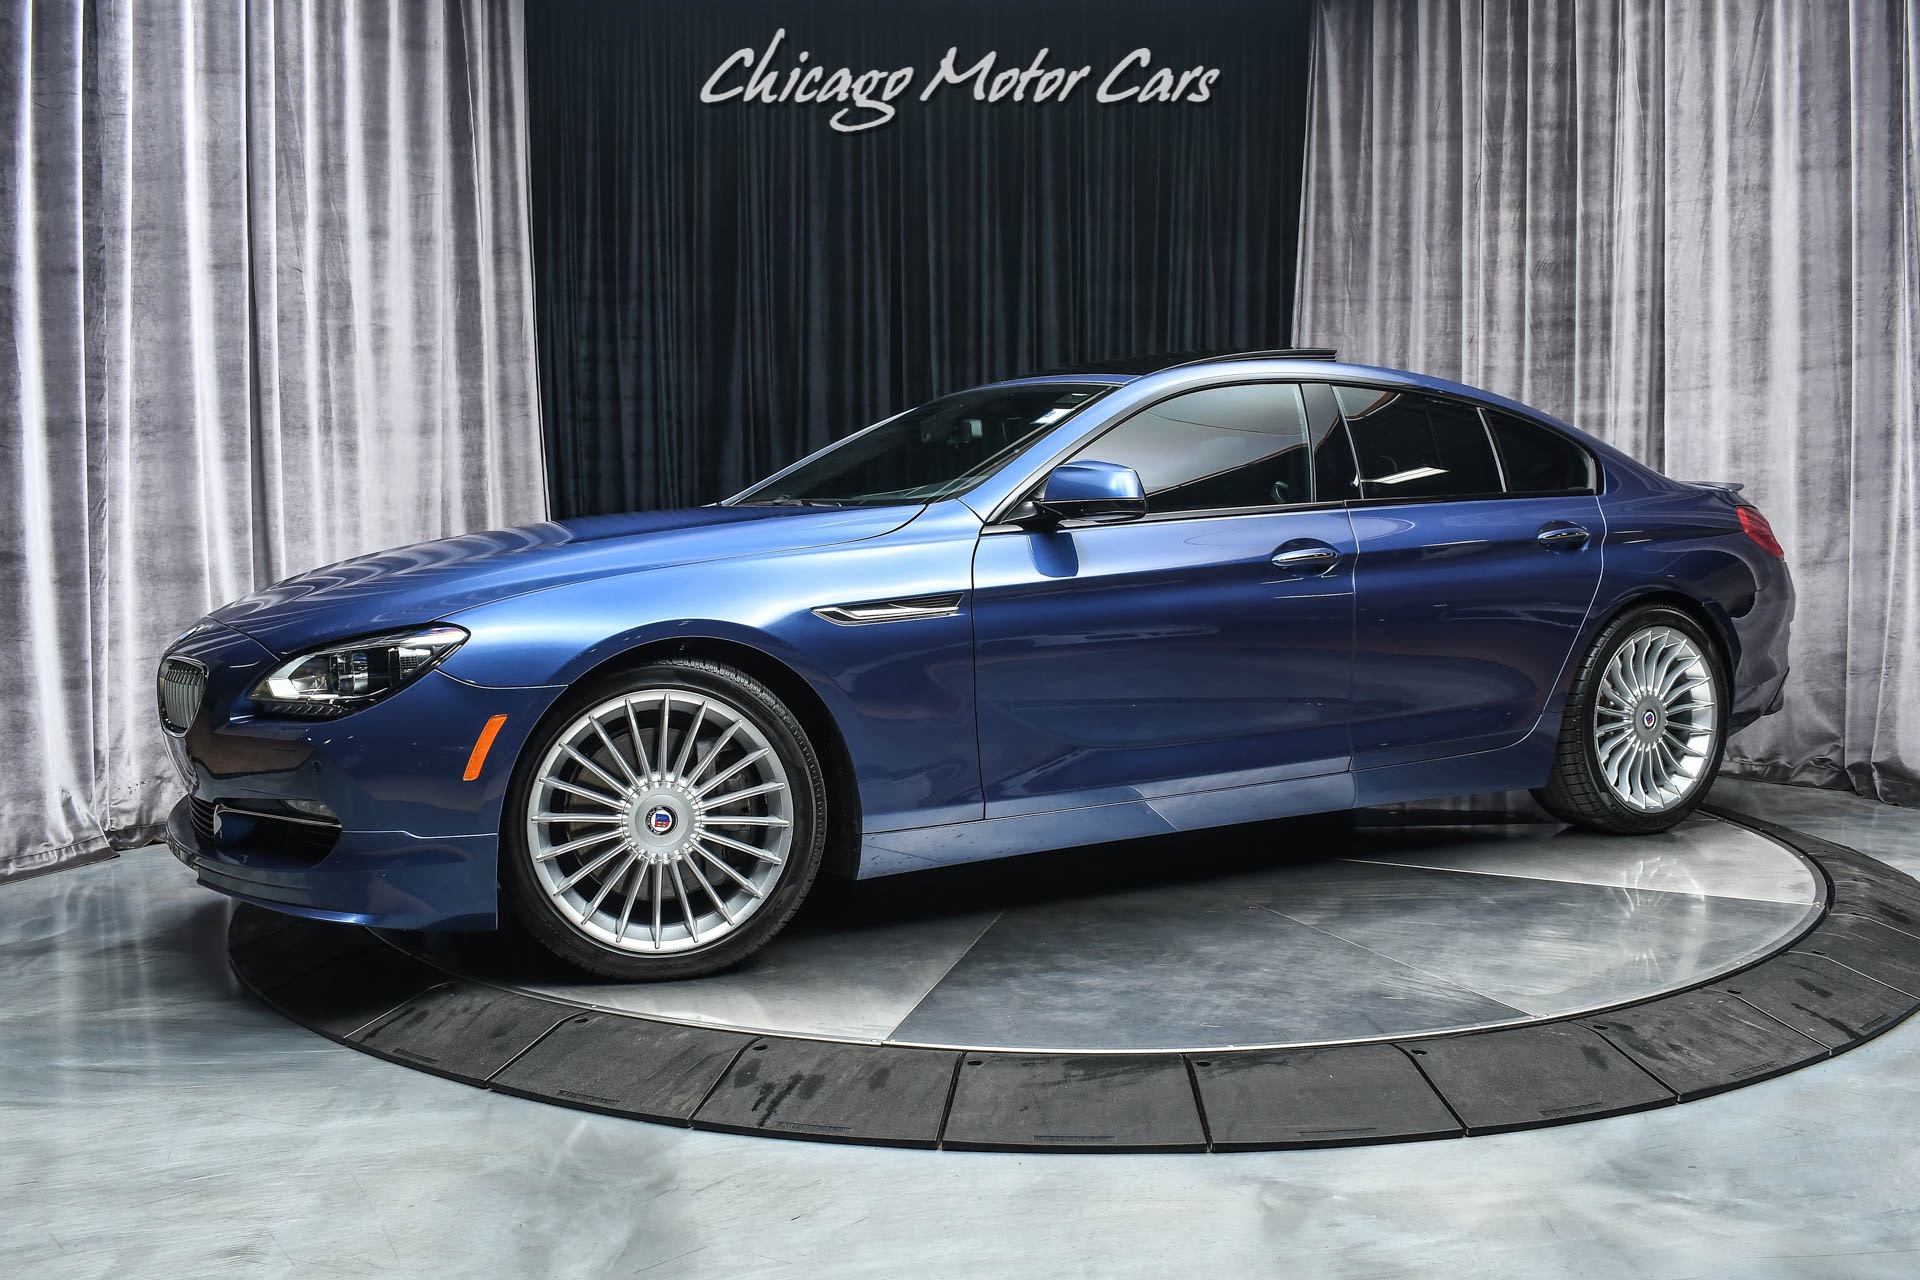 Used 2015 BMW 6 Series ALPINA B6 xDrive Gran Coupe $127k+MSRP! RARE B6  Example! For Sale (Special Pricing) | Chicago Motor Cars Stock #17935